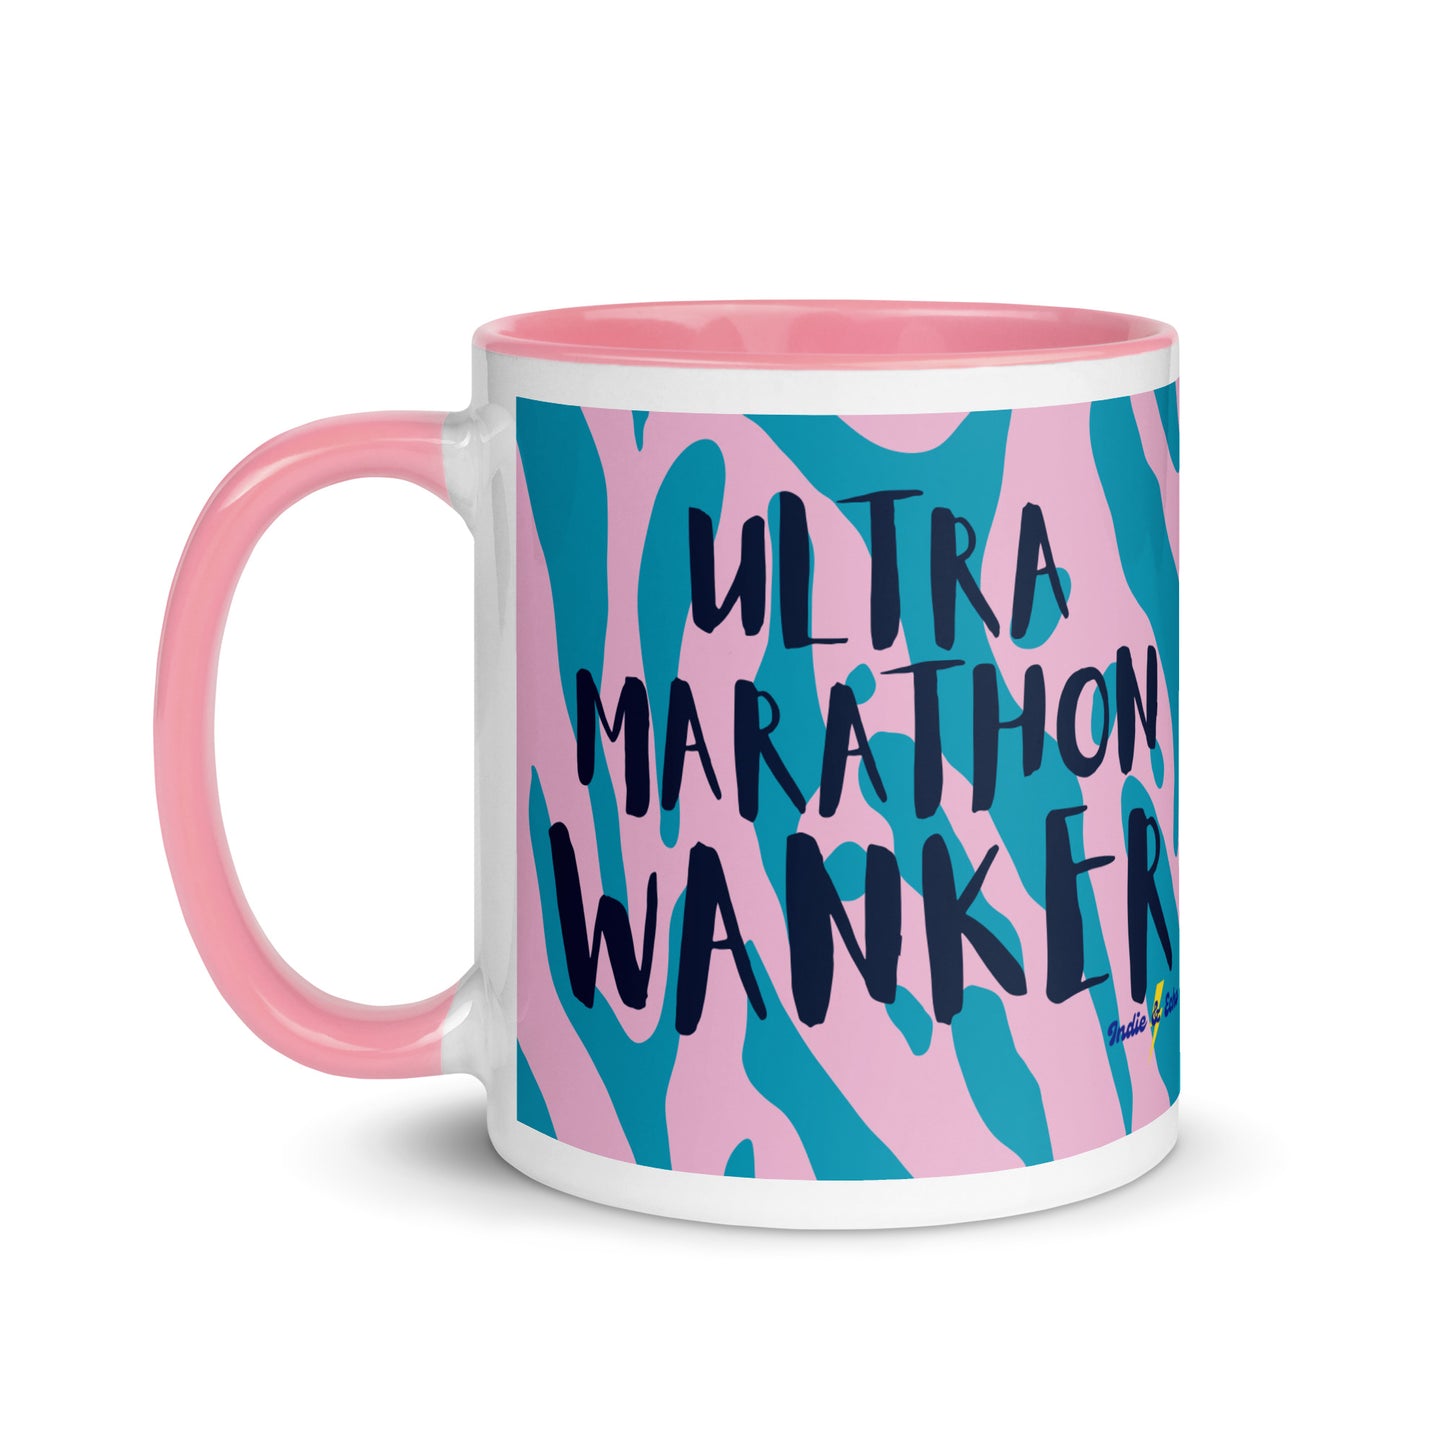 coffee mug with a pink handle and rim, with the words ultra marathon wanker written across a pink and blue animal print background. this is a running gift for ultra marathoners.